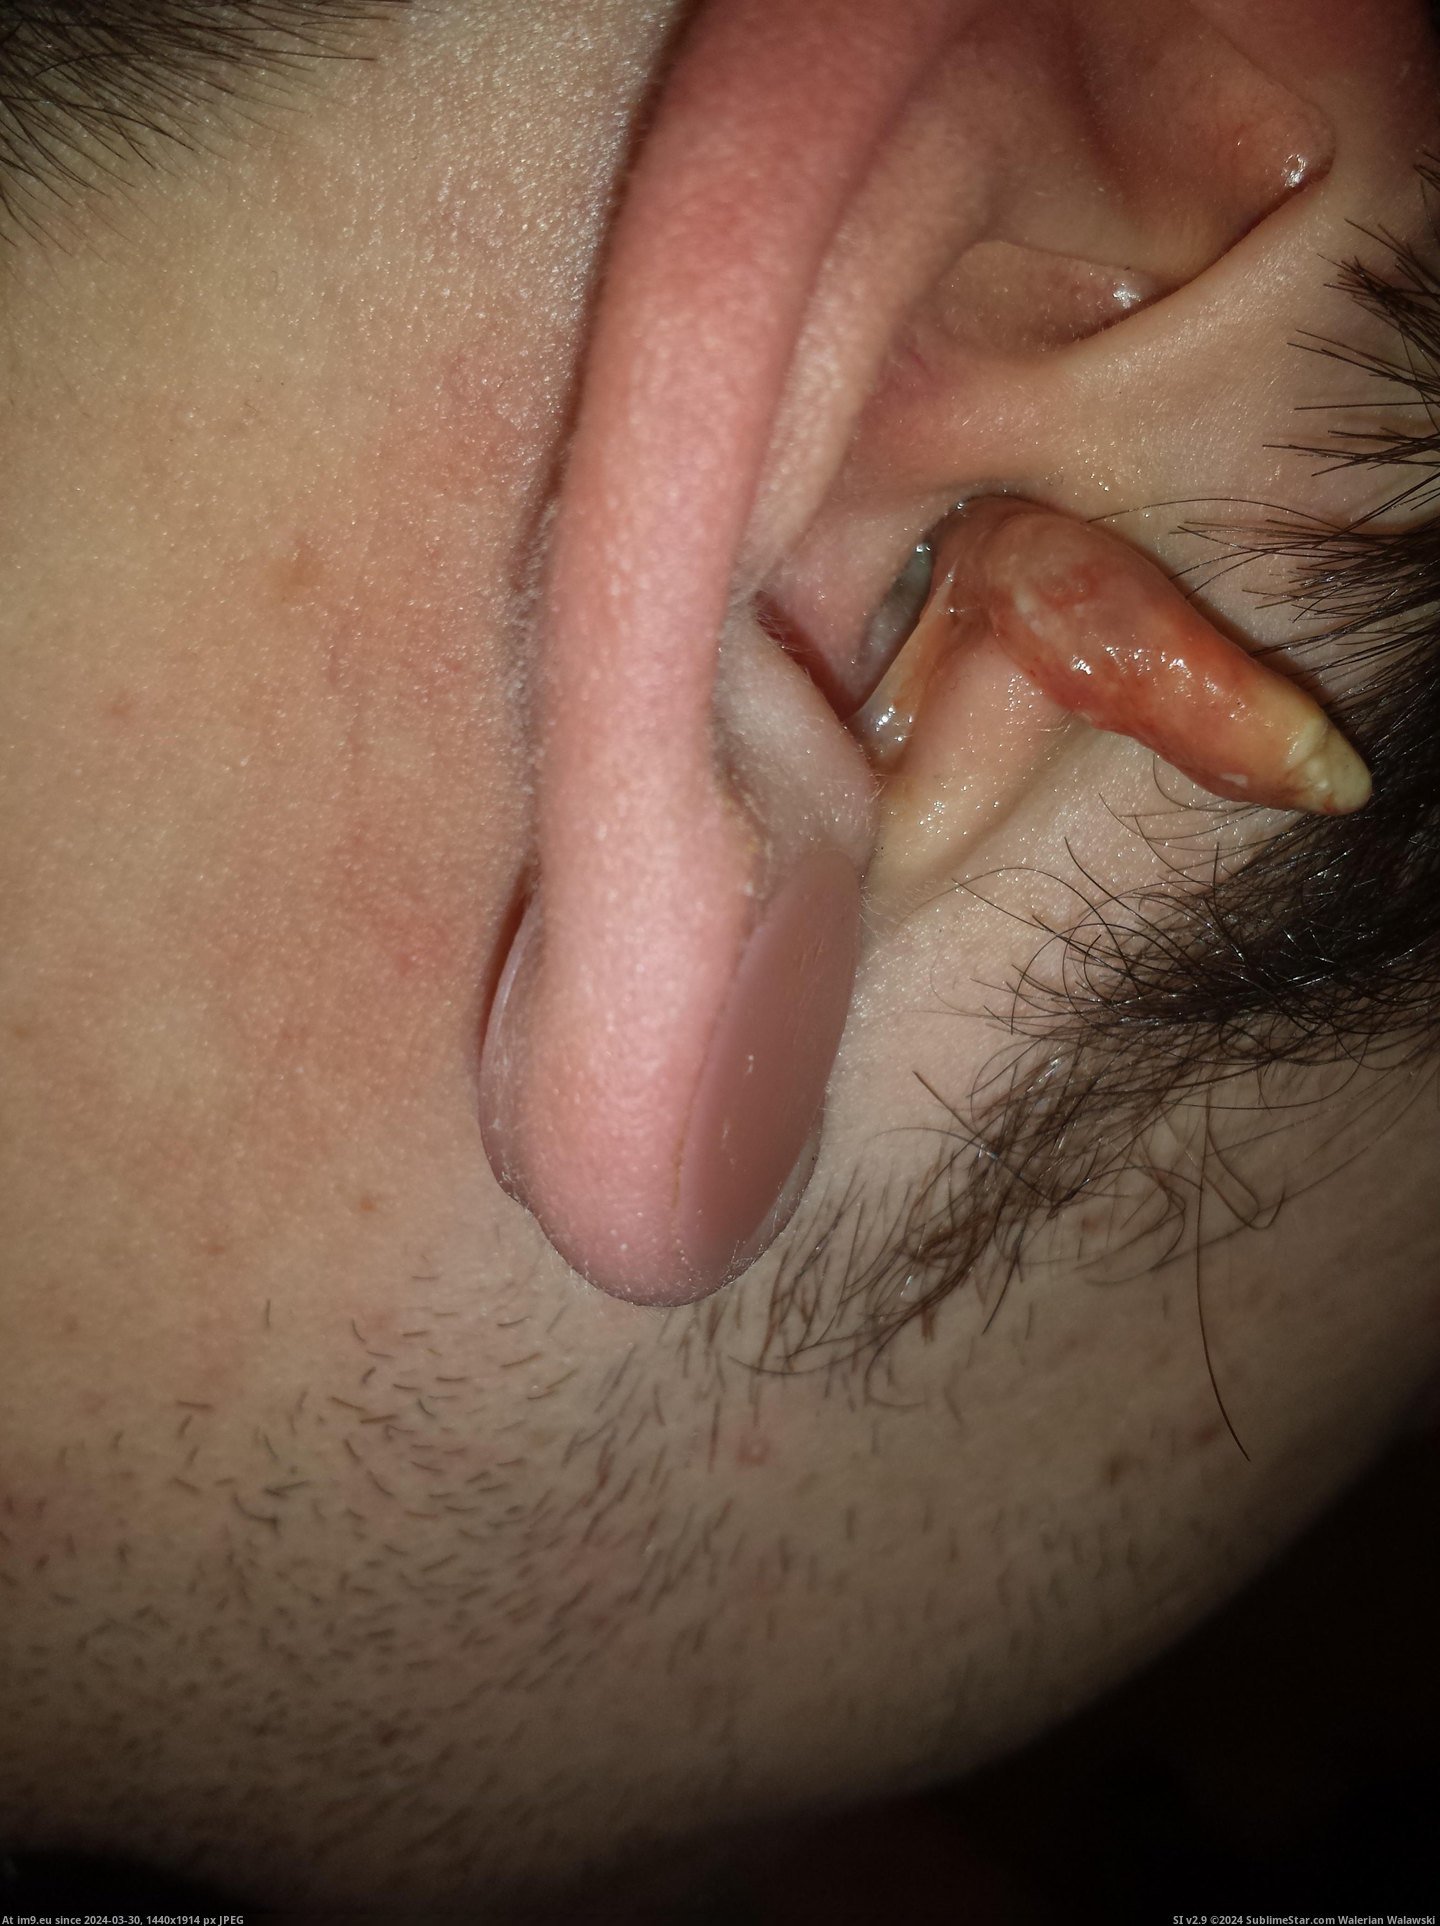 #Wtf #Ear #Infection #Crazy [Wtf] My crazy ear infection 6 Pic. (Image of album My r/WTF favs))